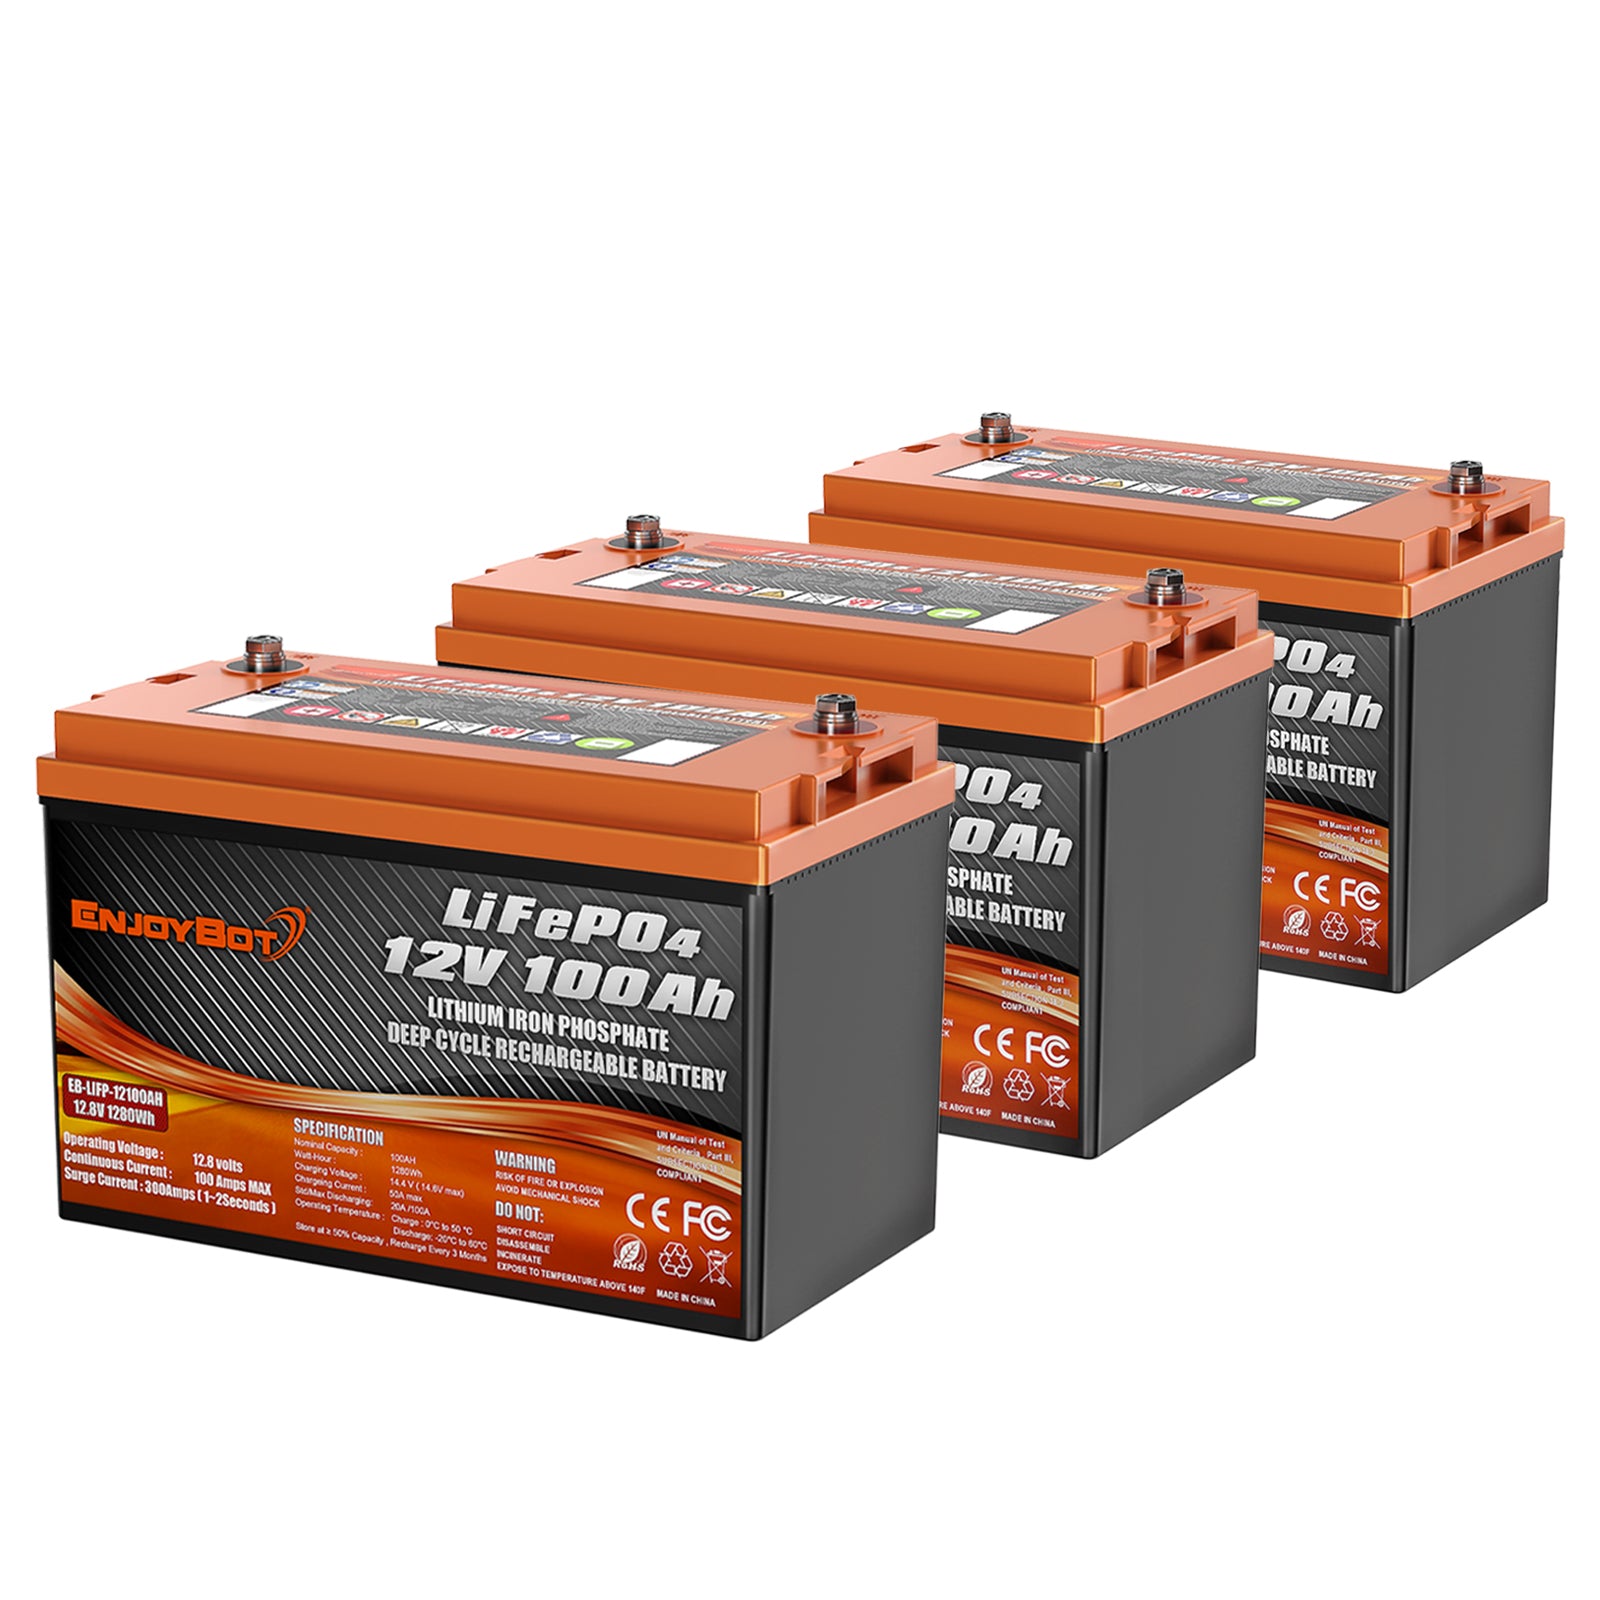 ENJOYBOT Used Second Hand Battery 12V 100AH LiFePO4 Lithium Battery –  Enjoybot Official Store